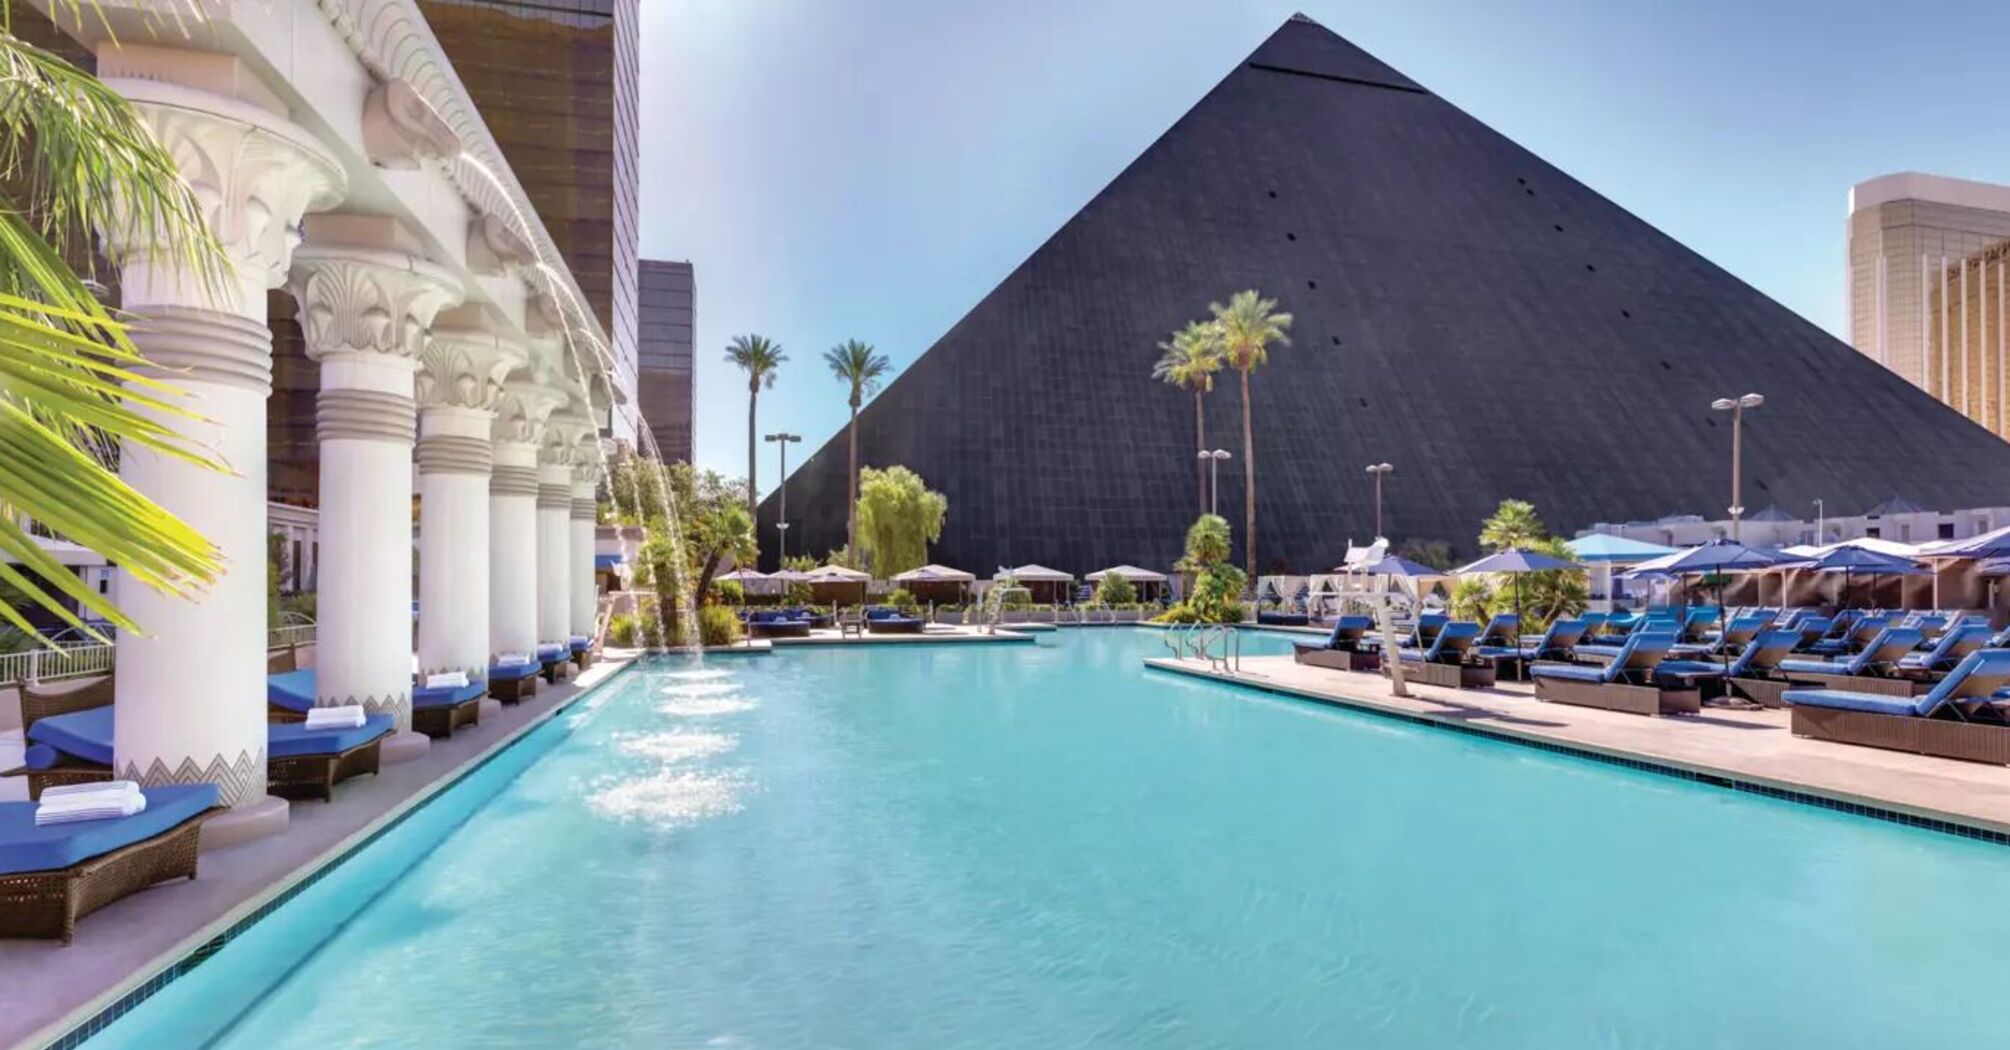 Top 9 cheap hotels in Las Vegas: from the iconic "pyramid" with amazing shows and casinos to tranquil lakeside oases with pools and spas